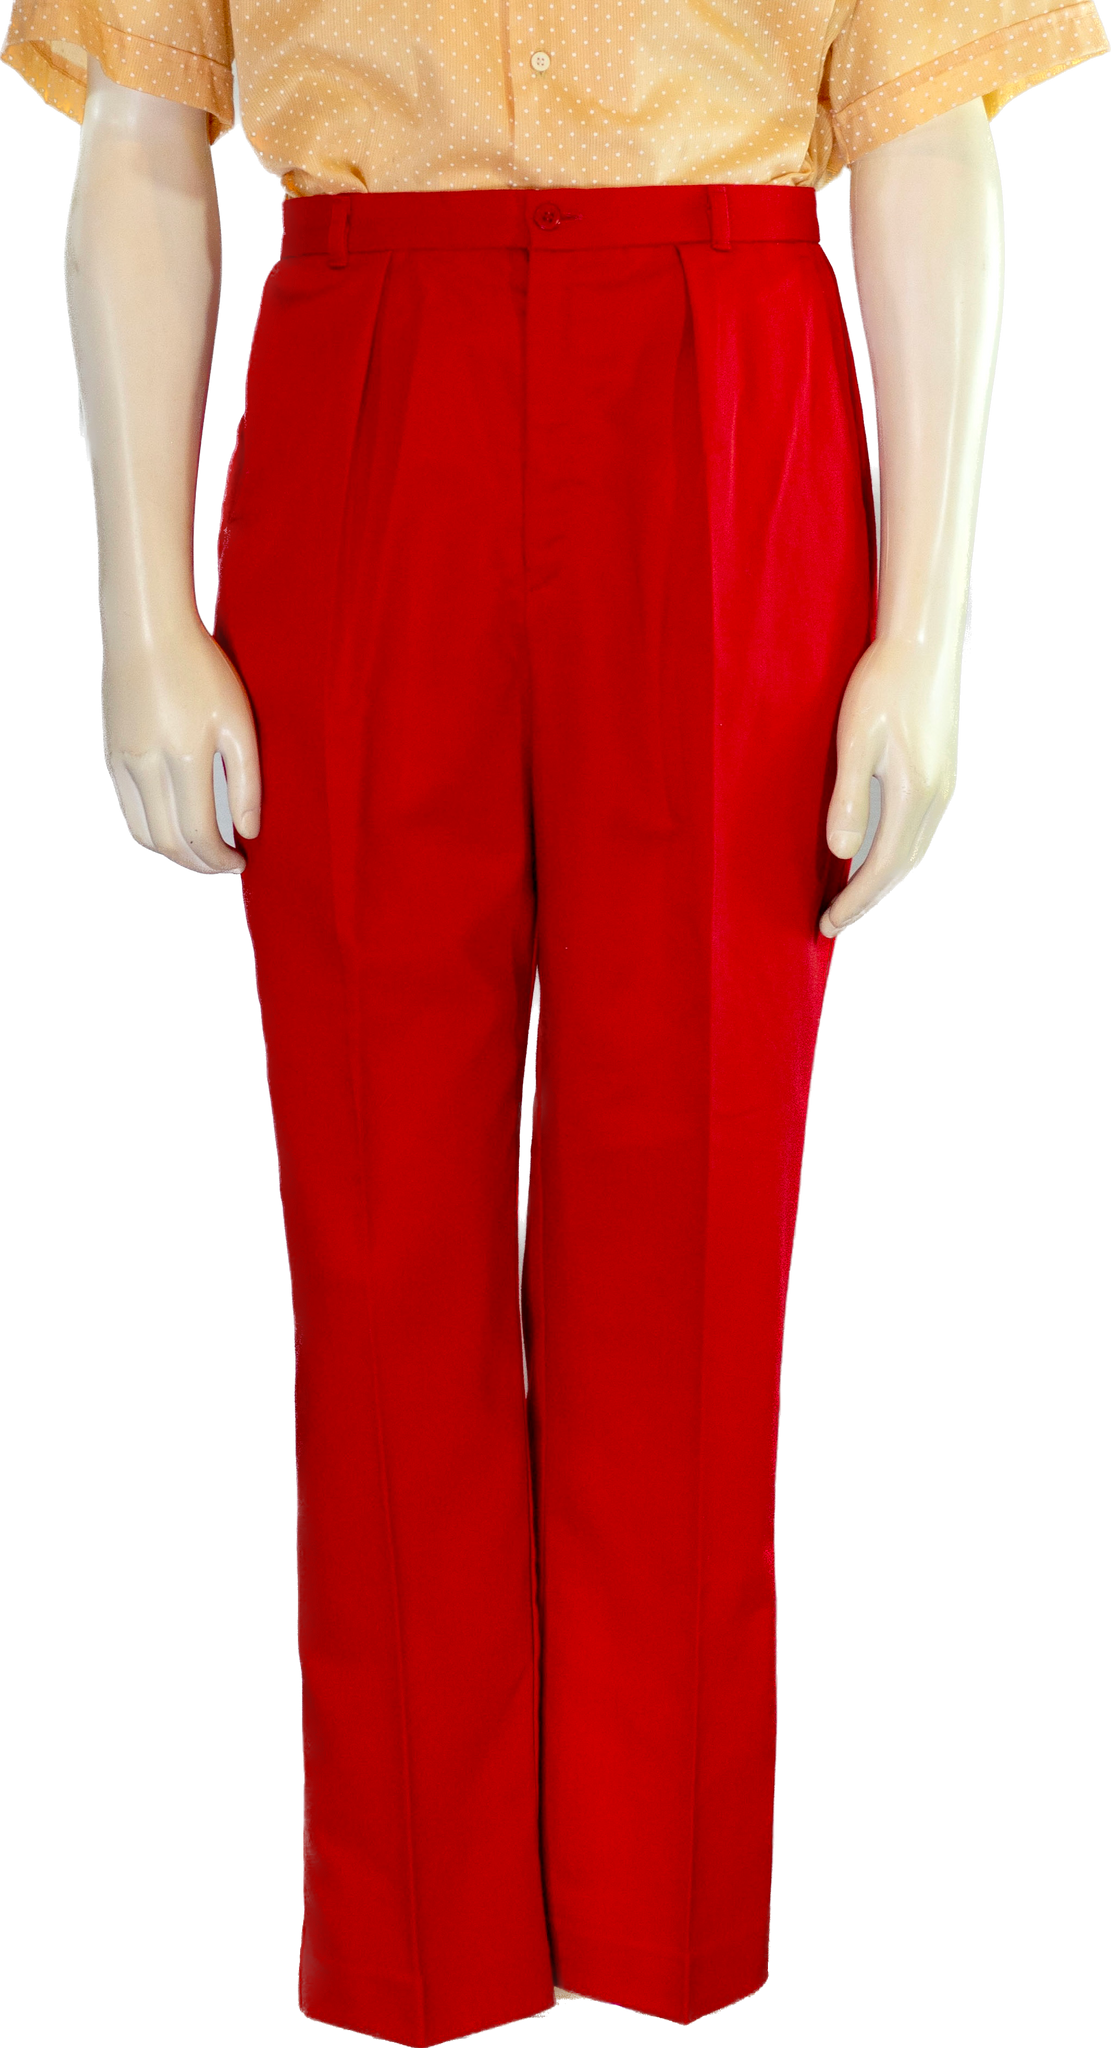 80s Fashion Place Red Pleat Trouser    W31